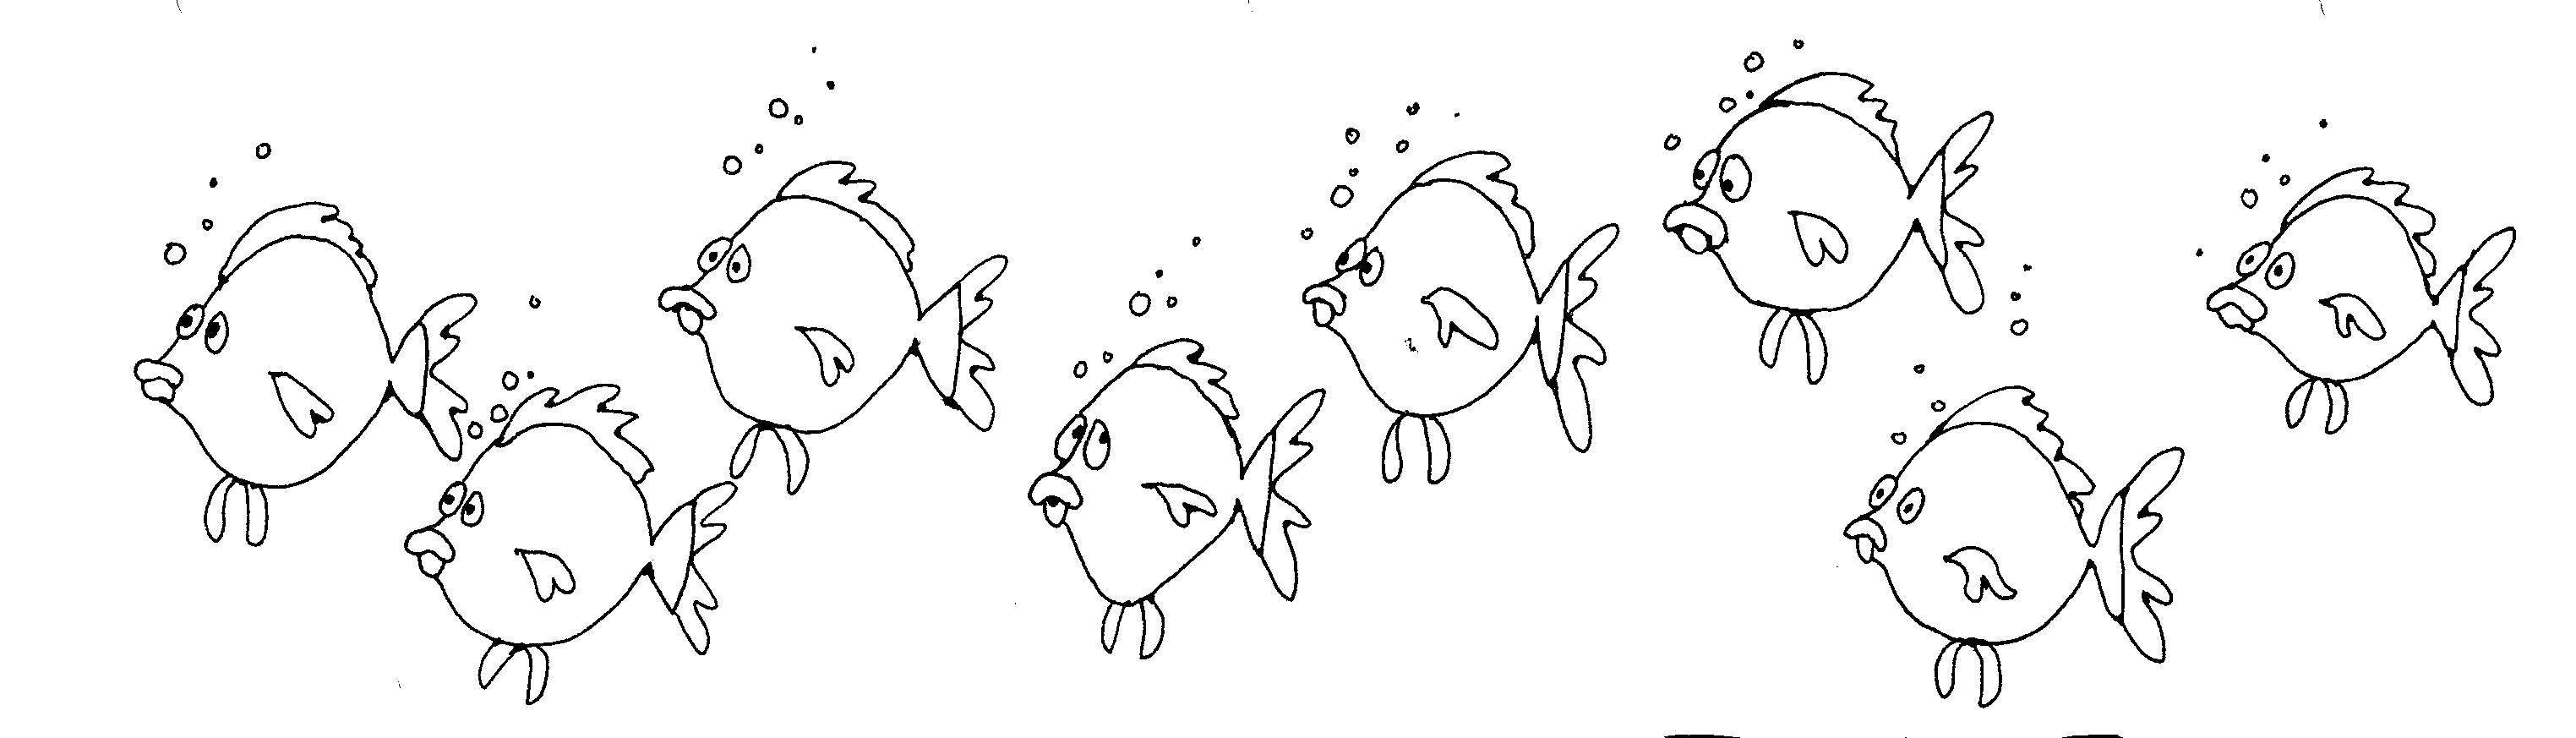 Fish black and white school of fish clipart black and white 2.